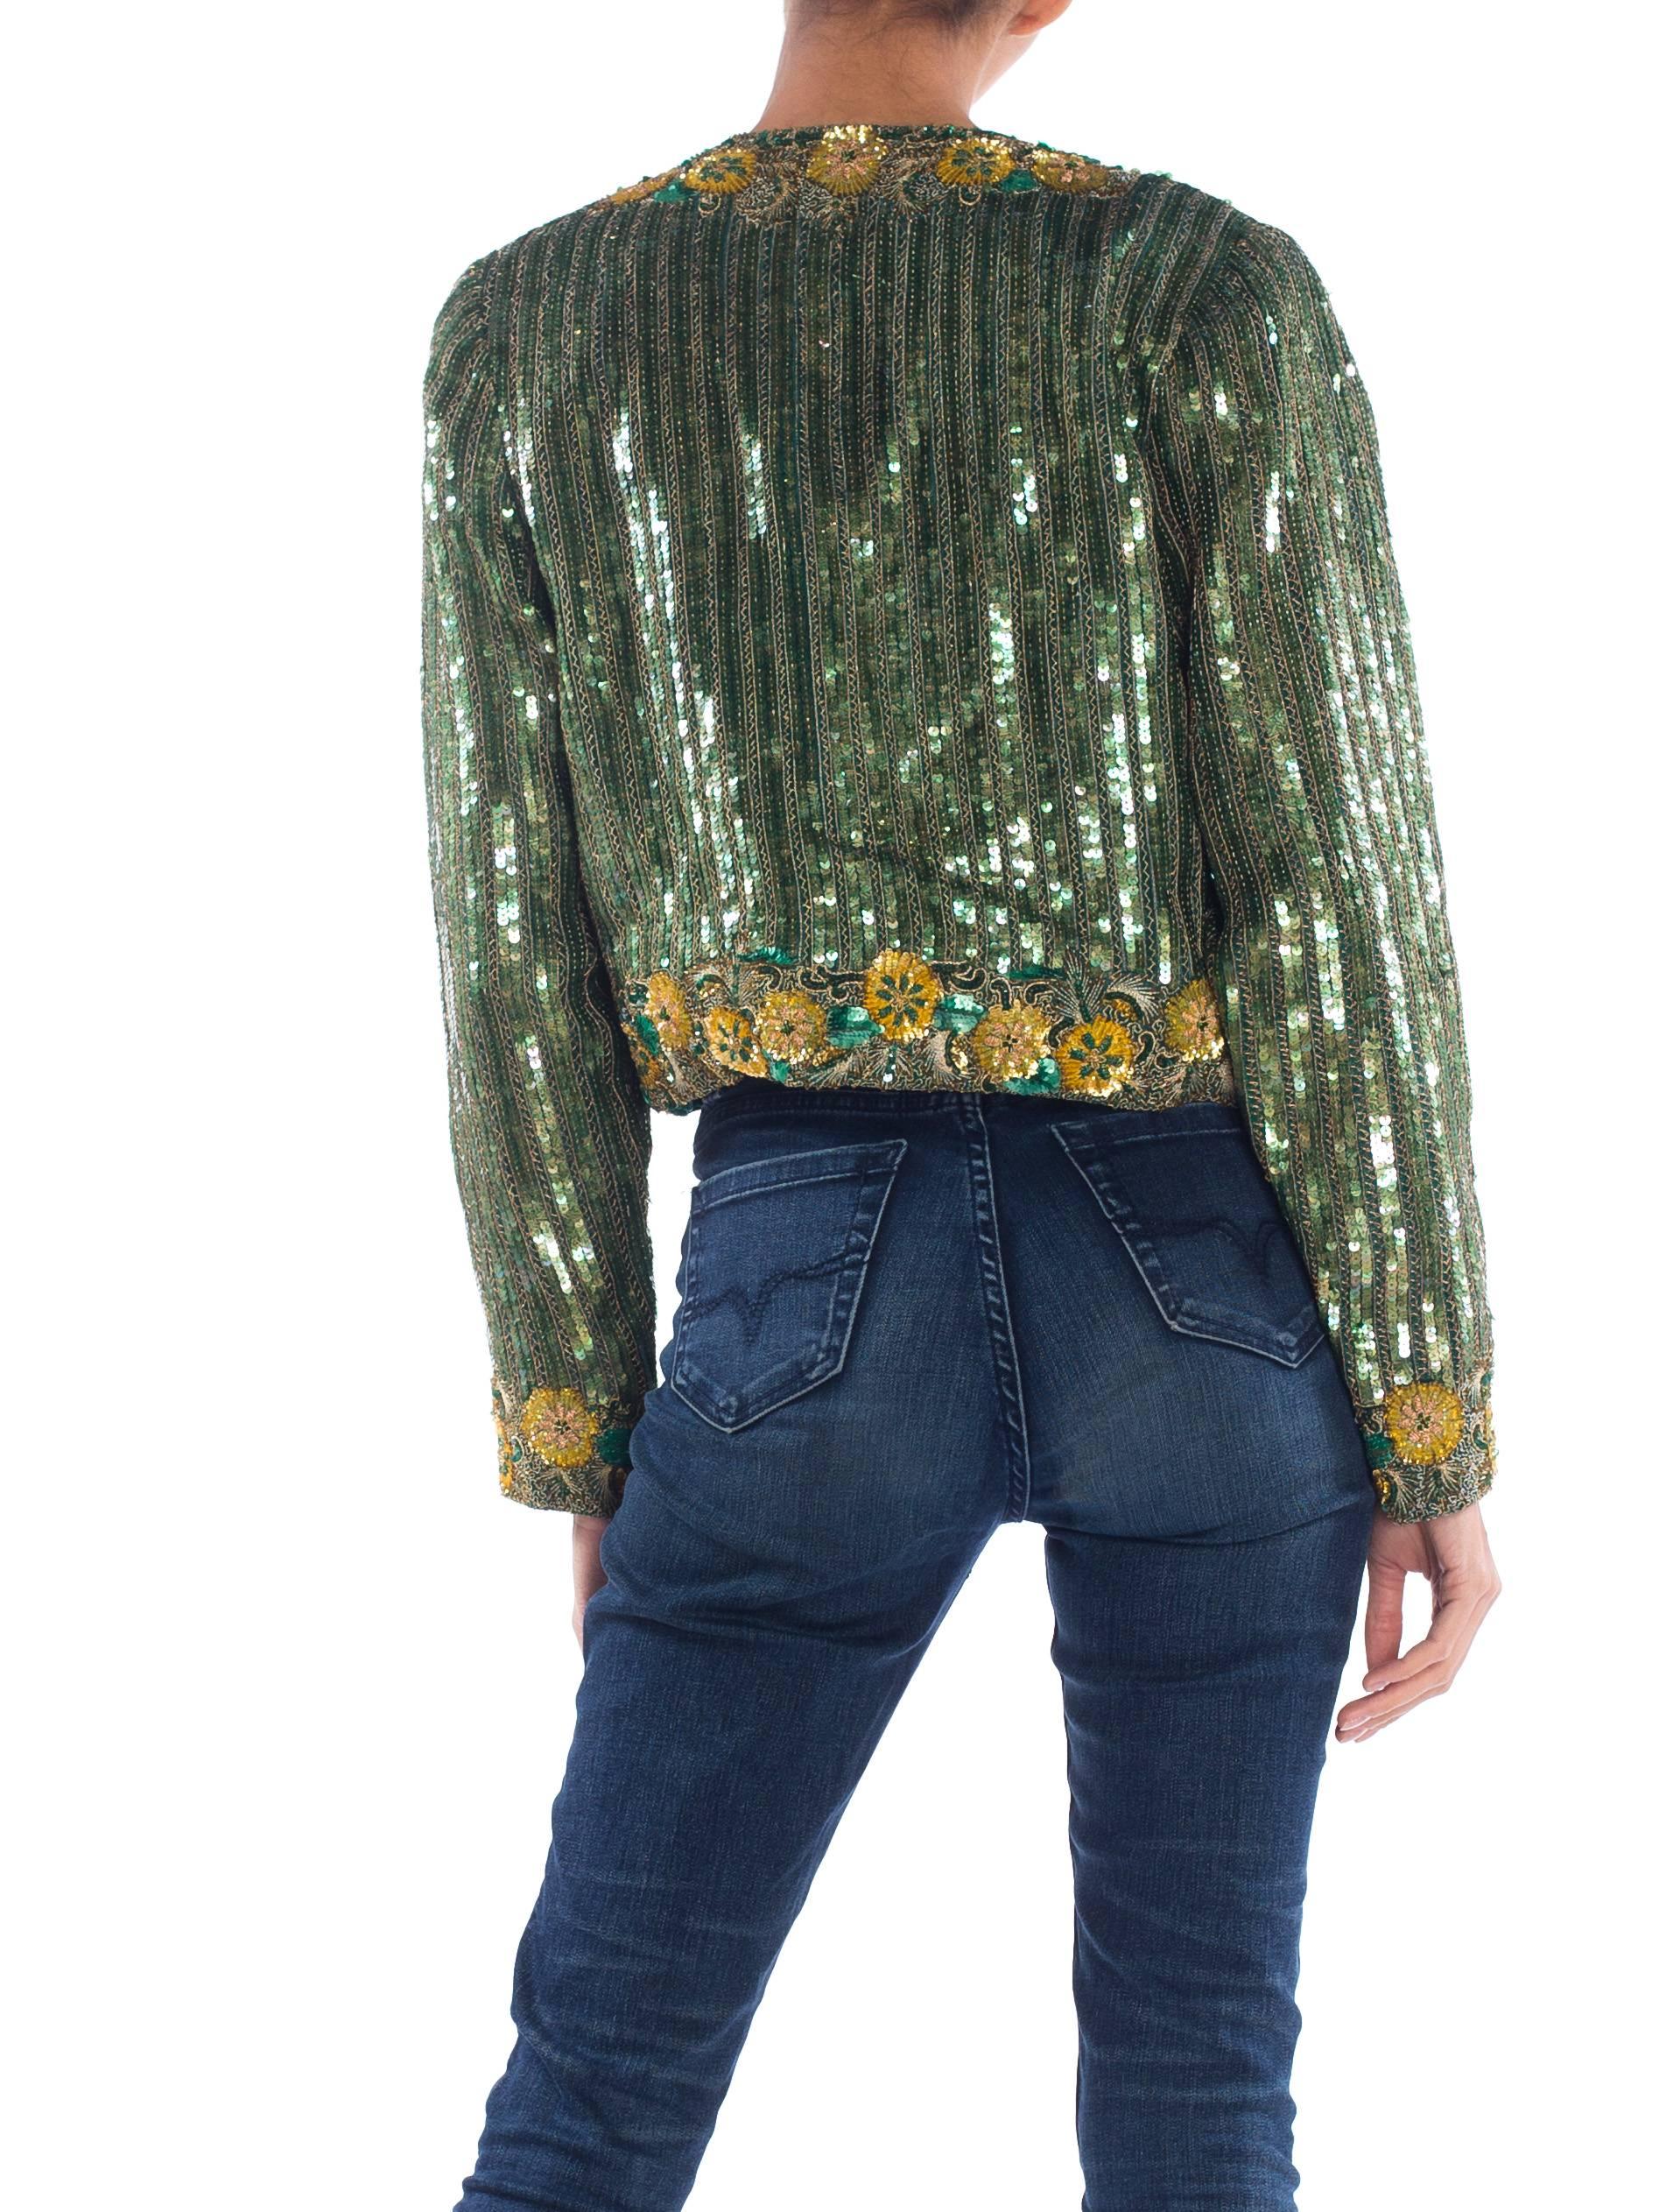 Gray 1980S RICHILENE Emerald Green Silk Jacket Beaded With Gold Flowers & Embroidery